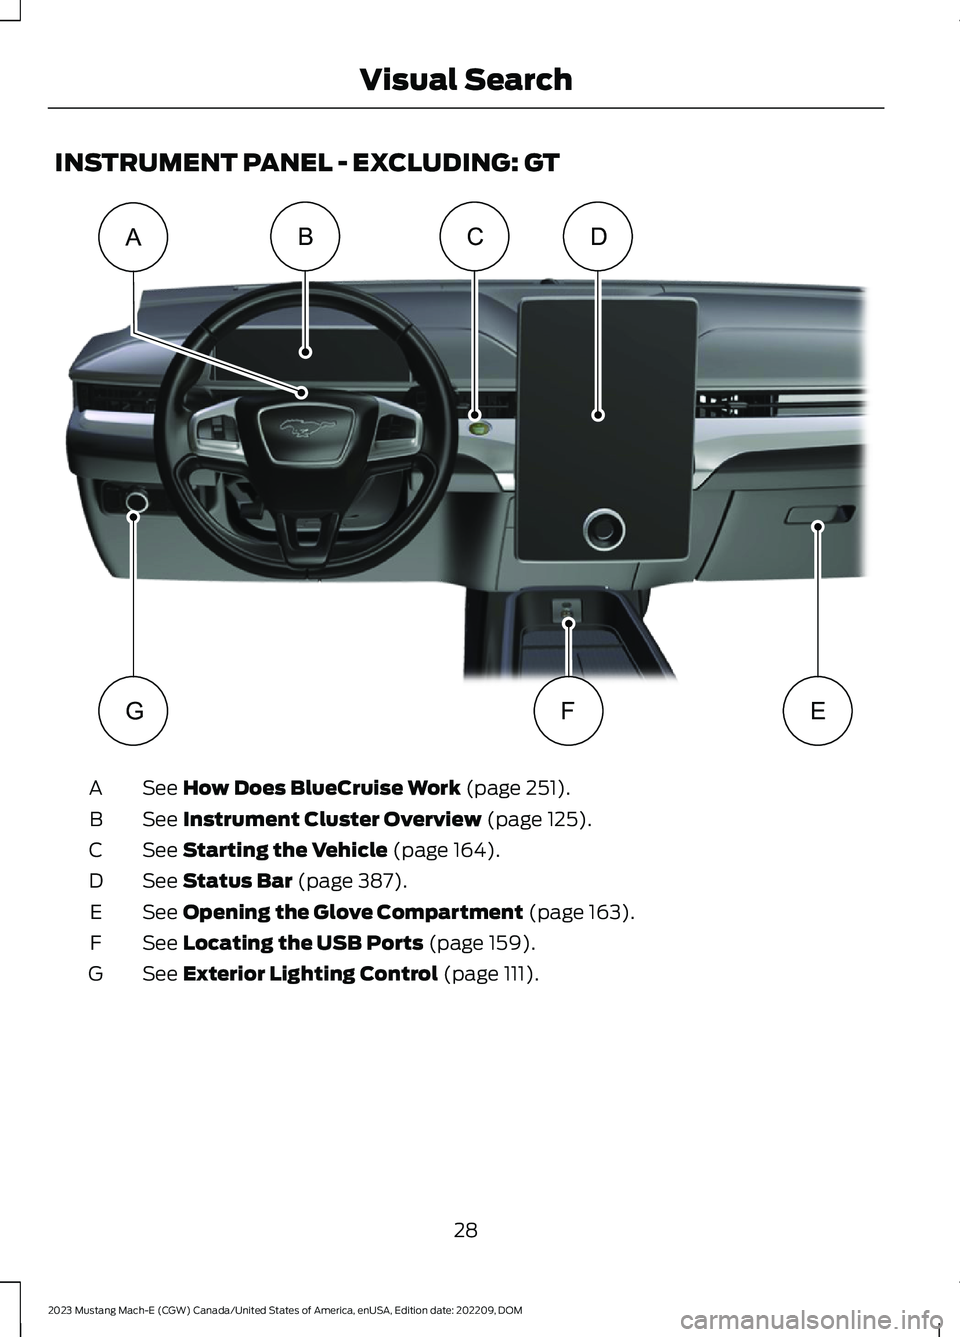 FORD MUSTANG MACH E 2023  Owners Manual INSTRUMENT PANEL - EXCLUDING: GT
See How Does BlueCruise Work (page 251).A
See Instrument Cluster Overview (page 125).B
See Starting the Vehicle (page 164).C
See Status Bar (page 387).D
See Opening th